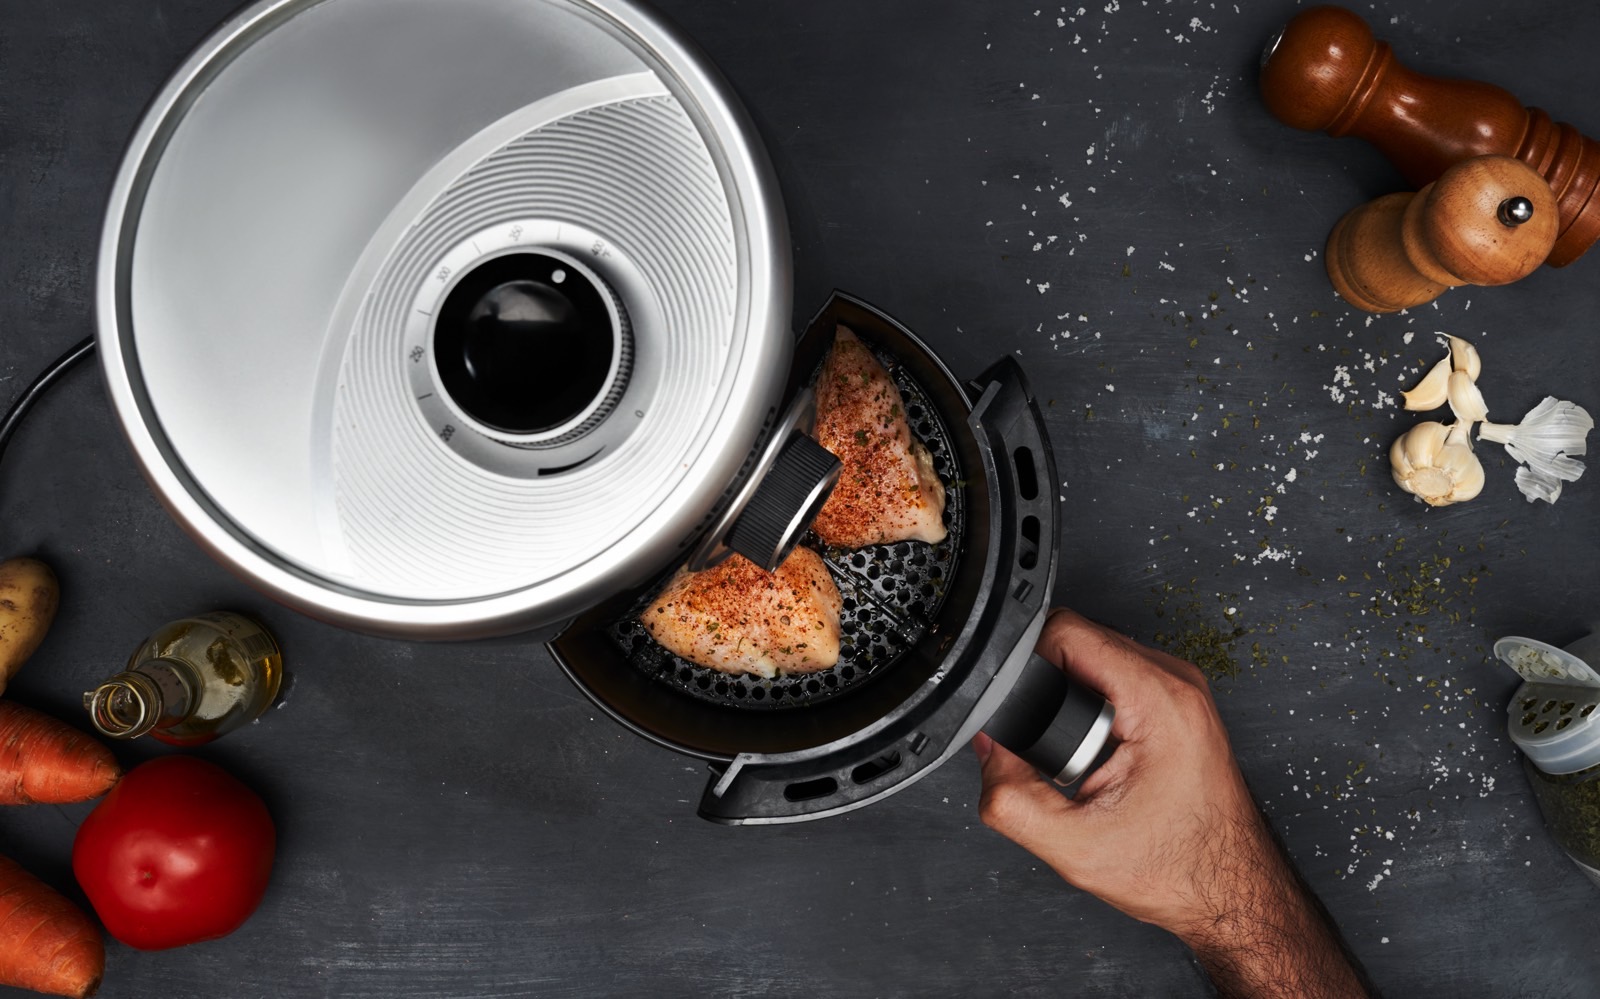 Urgent air fryer recall Popular model sold at Target, Amazon, and more